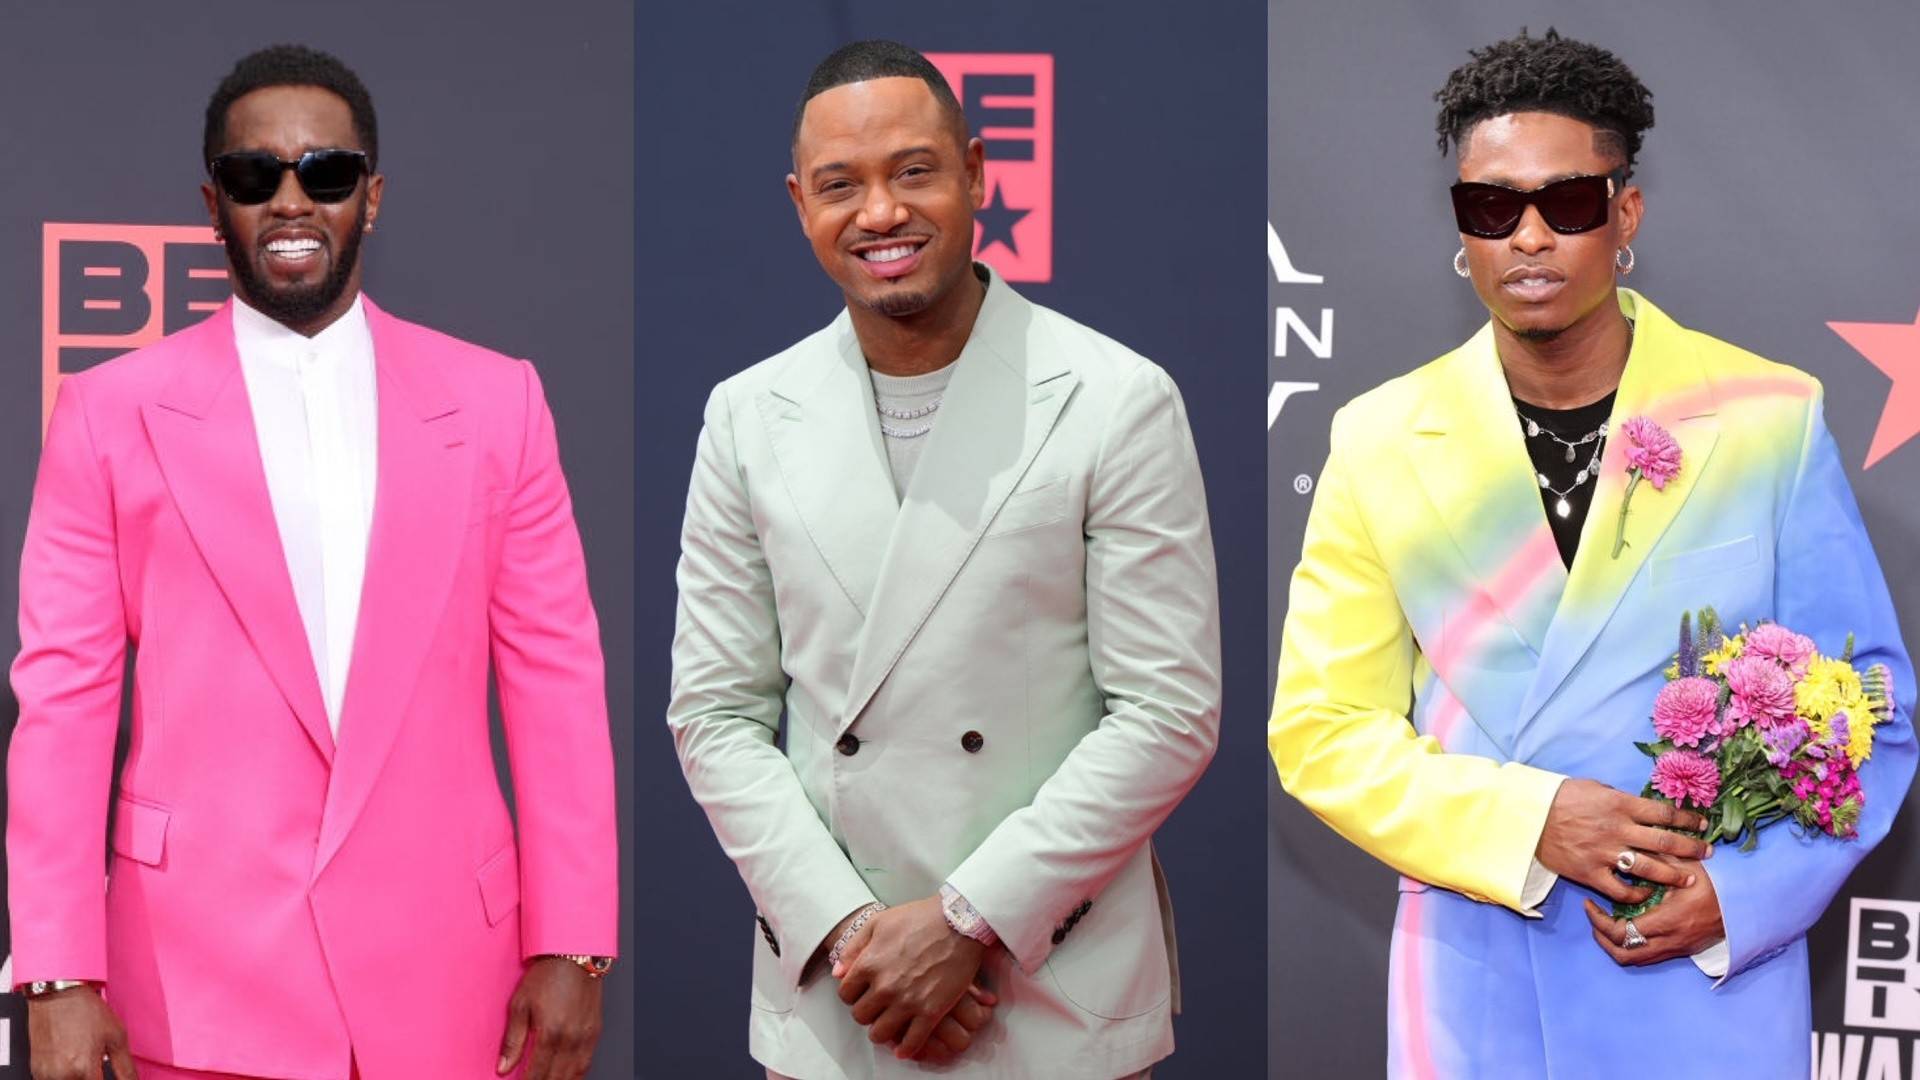 BET Awards 2022 'This is the Remix:' The Fly Fellas From the Red Carpet ...